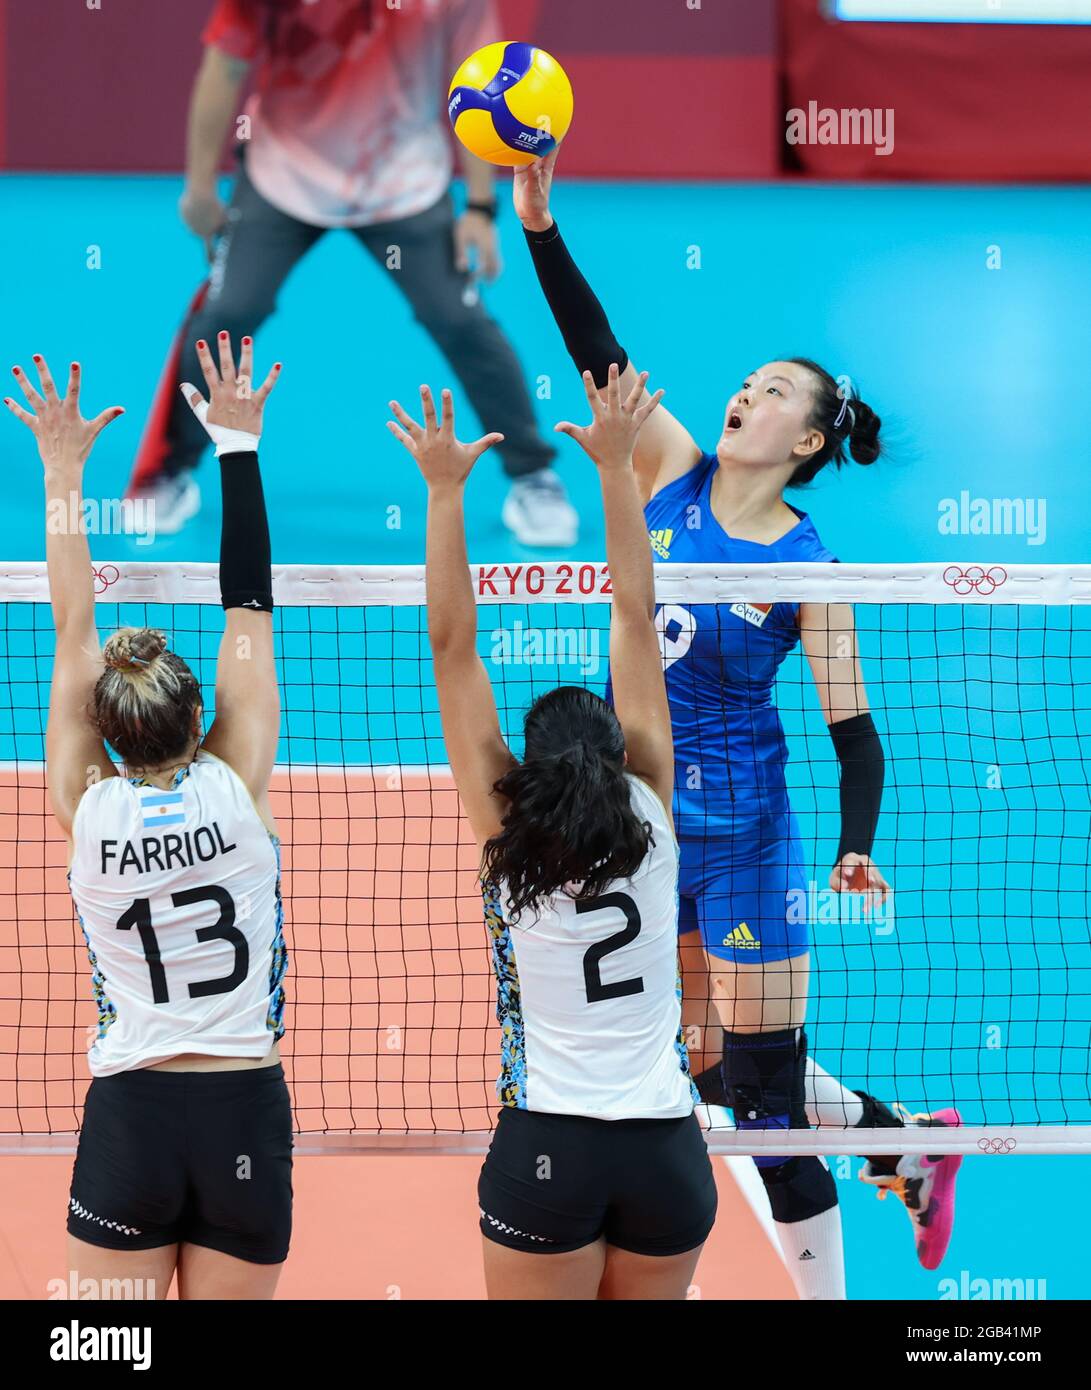 Tokyo, Japan. 2nd Aug, 2021. Zhang Changning (R) of China competes during the women's volleyball preliminary match between China and Argentina at the Tokyo 2020 Olympic Games in Tokyo, Japan, Aug. 2, 2021. Credit: Ding Ting/Xinhua/Alamy Live News Stock Photo